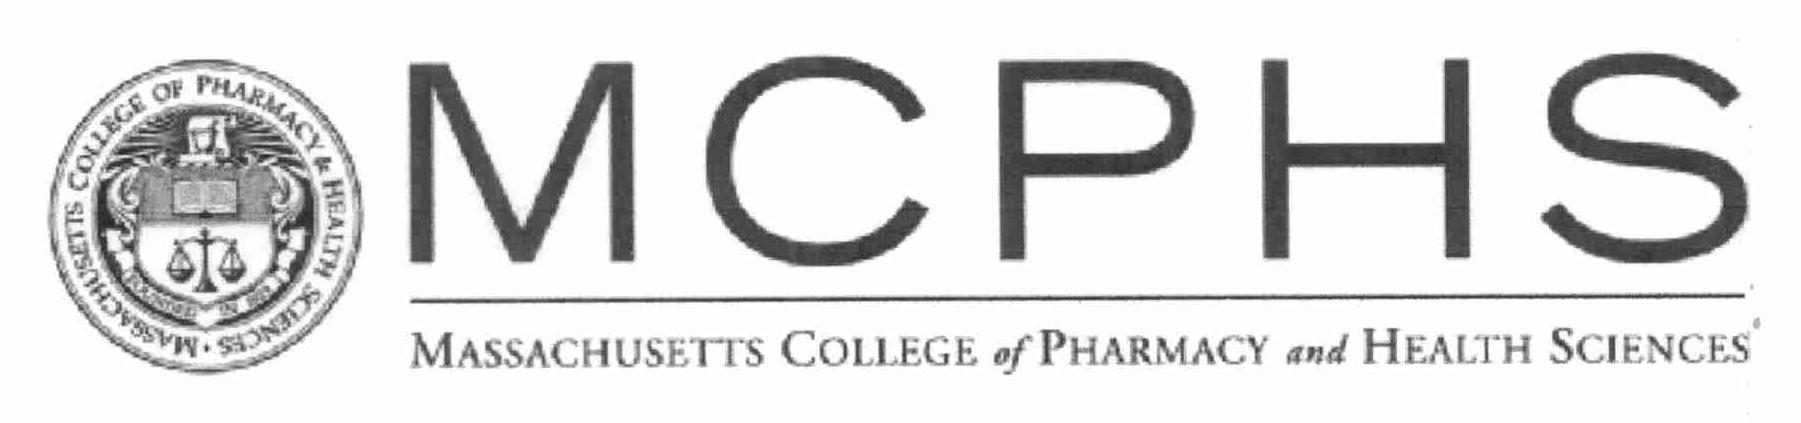  MCPHS MASSACHUSETTS COLLEGE OF PHARMACY AND HEALTH SCIENCES